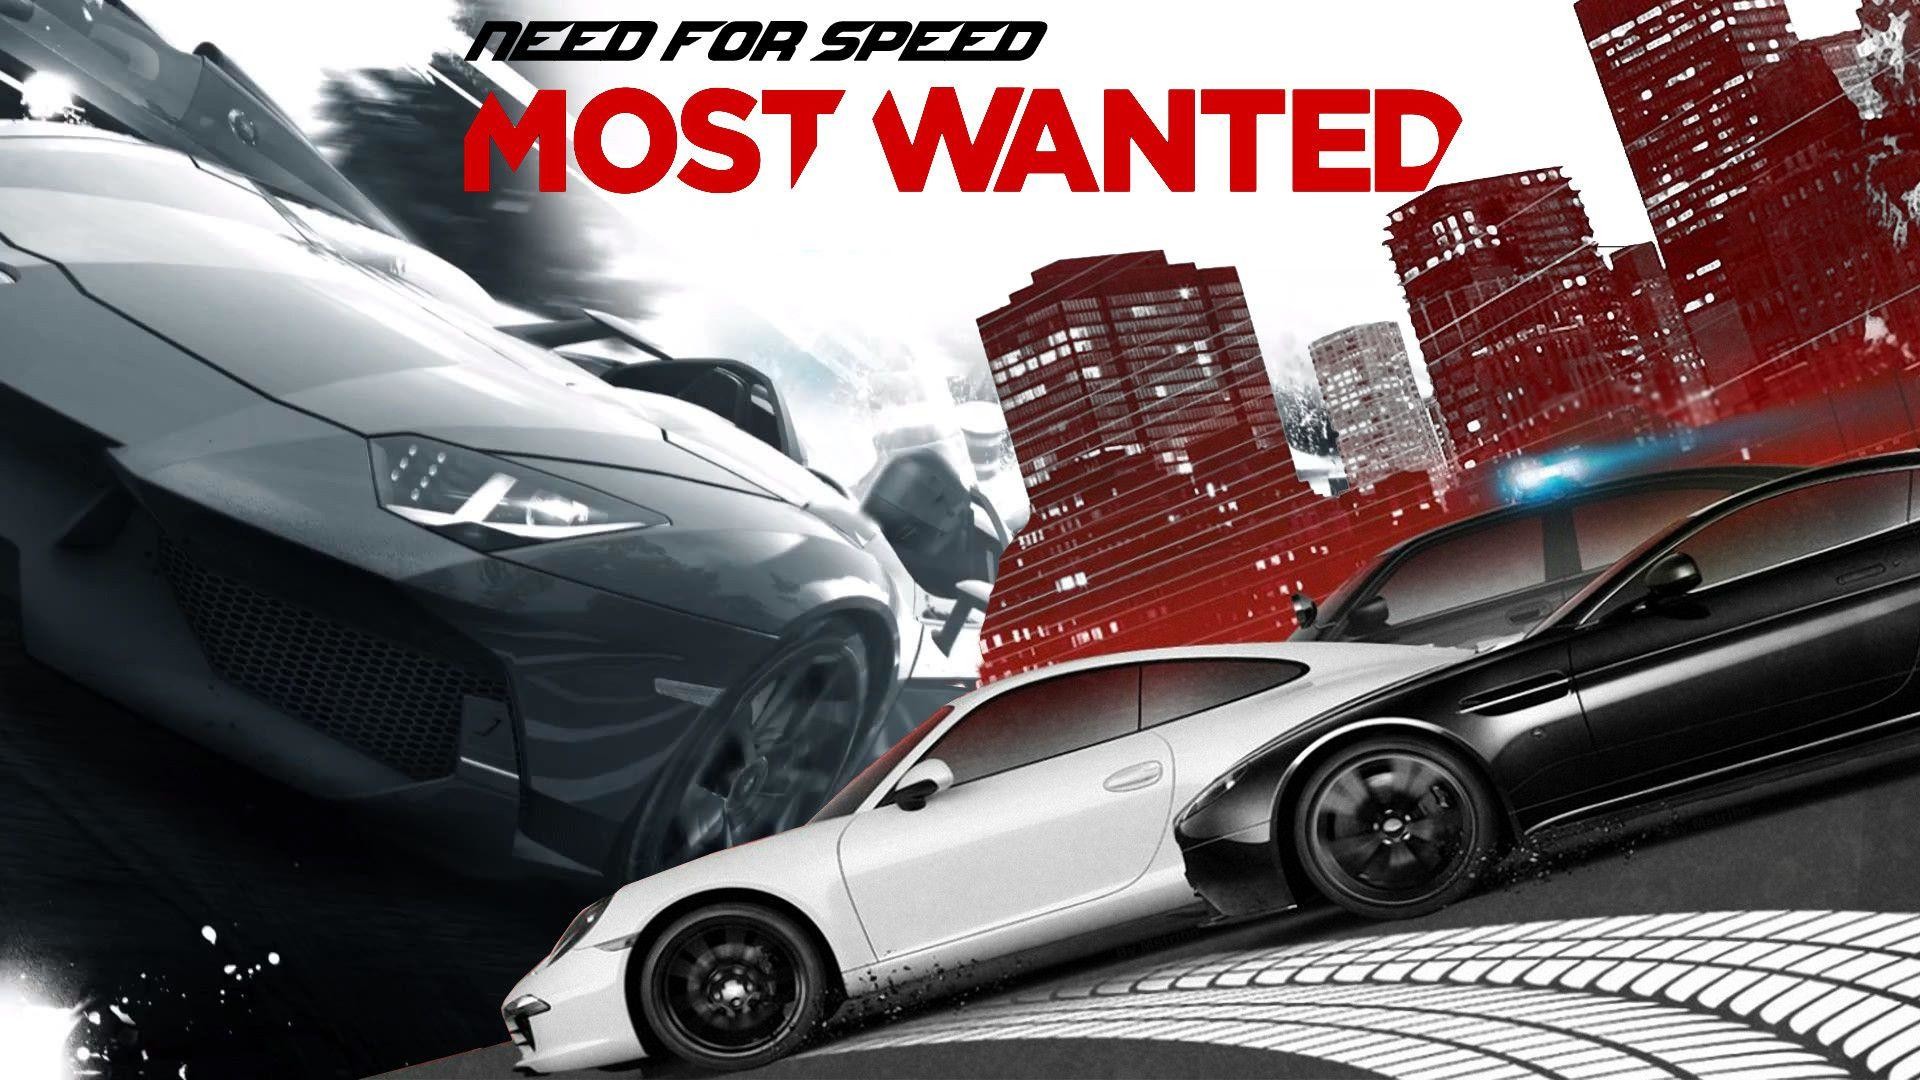 Wallpapers Nfs Most Wanted Desktop Background Nfs Most Wanted Desktop  Background | Photo | Fair Usage